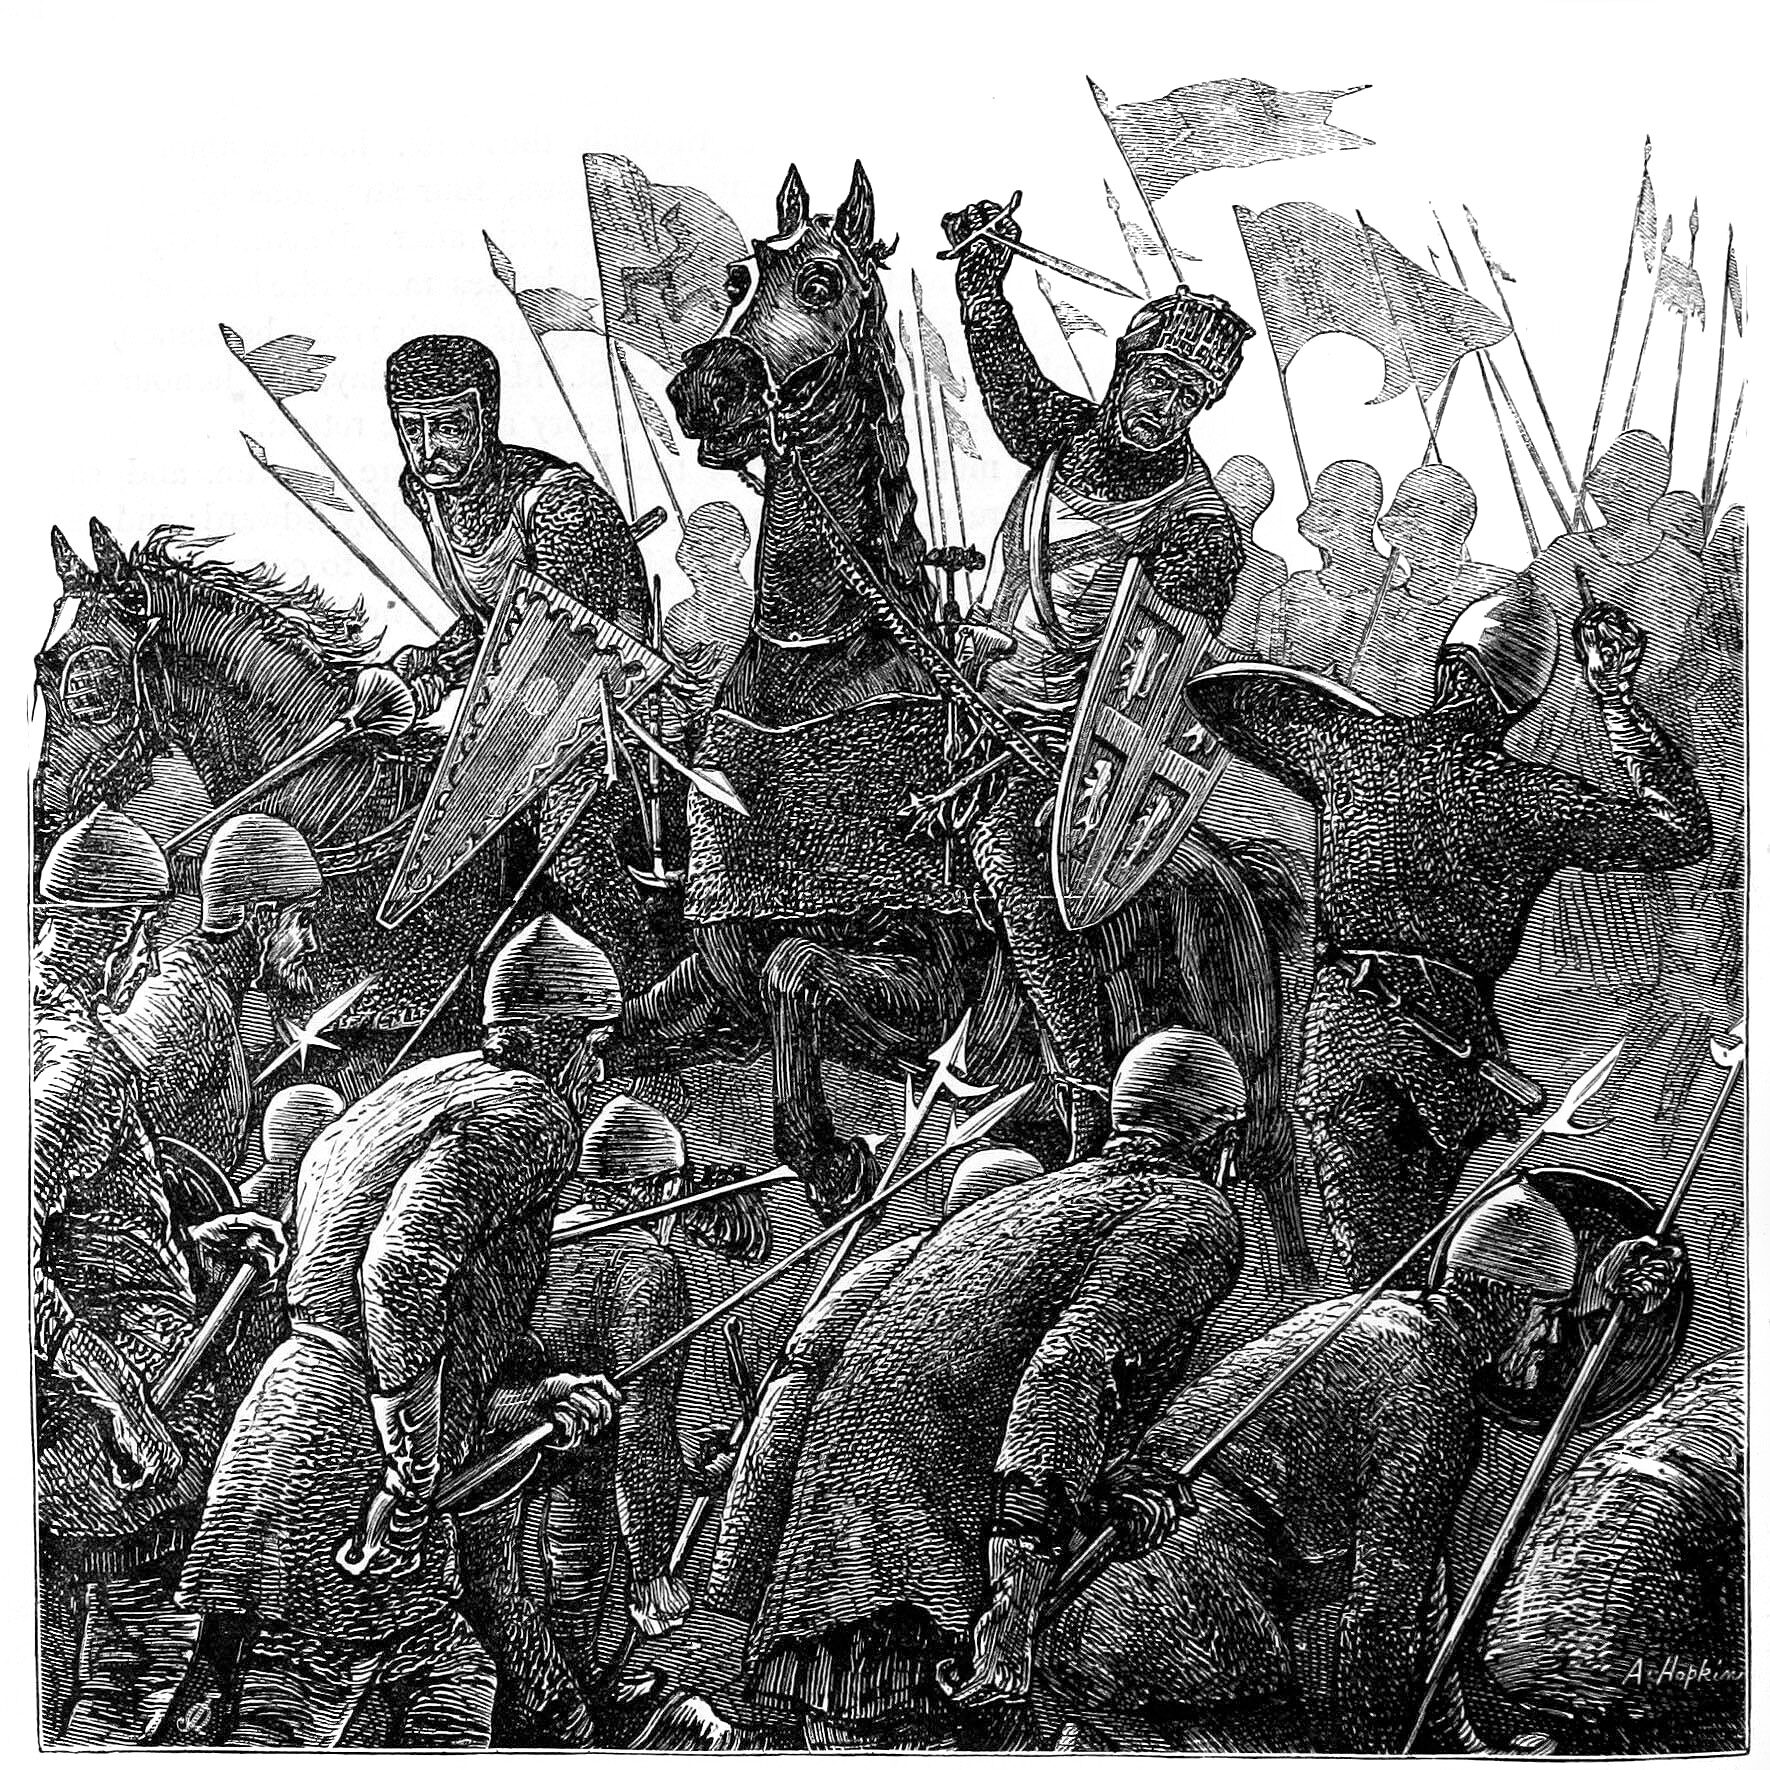 Using lances, swords, and maces, English knights overpower schiltrons drastically weakened by the English arrow storm at Falkirk.